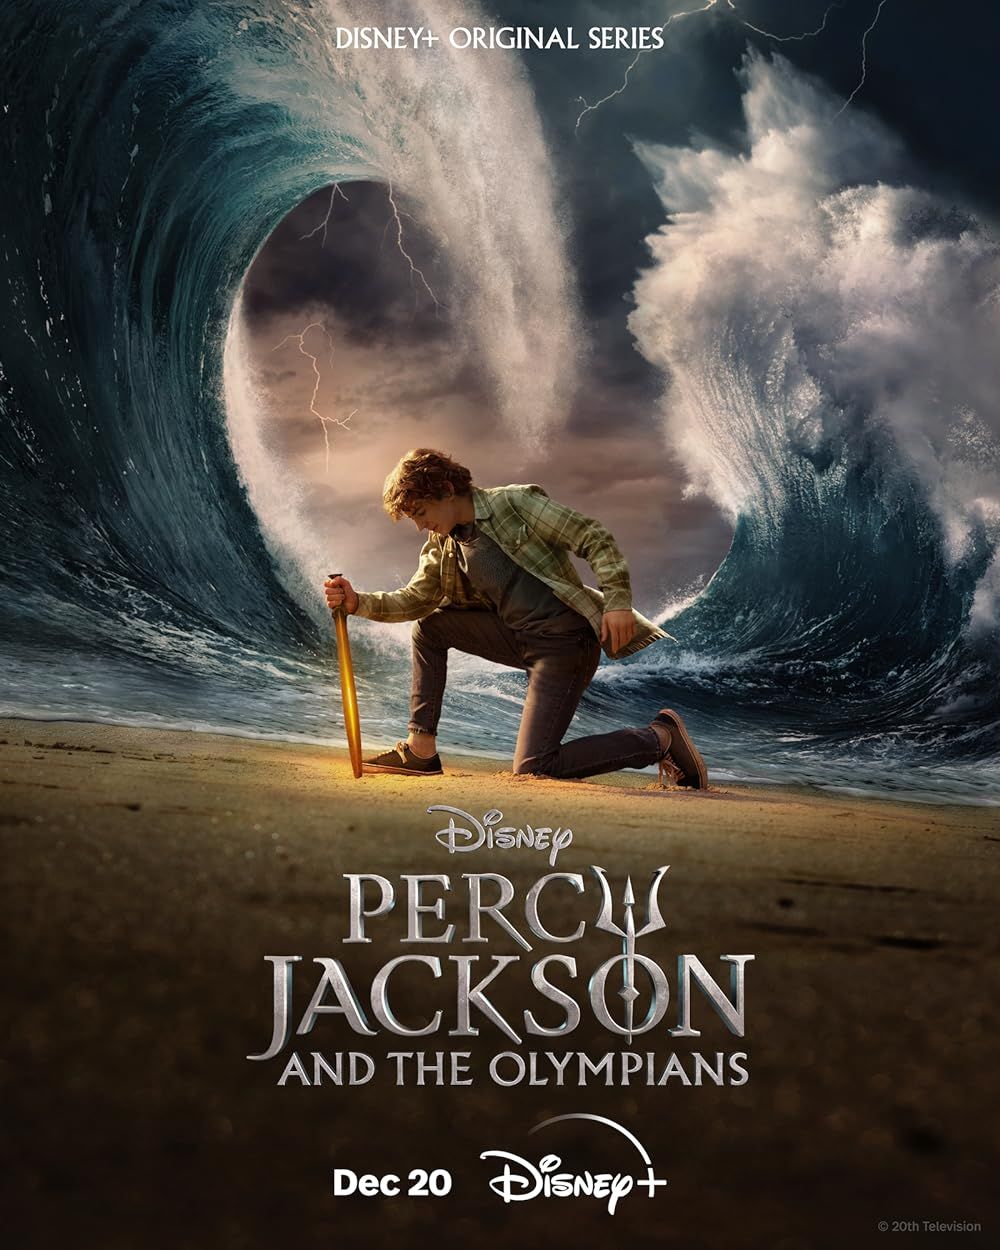 Percy Jackson Holds a Sword with Waves Crashing Behind Him on the Percy Jackson and the Olympians Promo